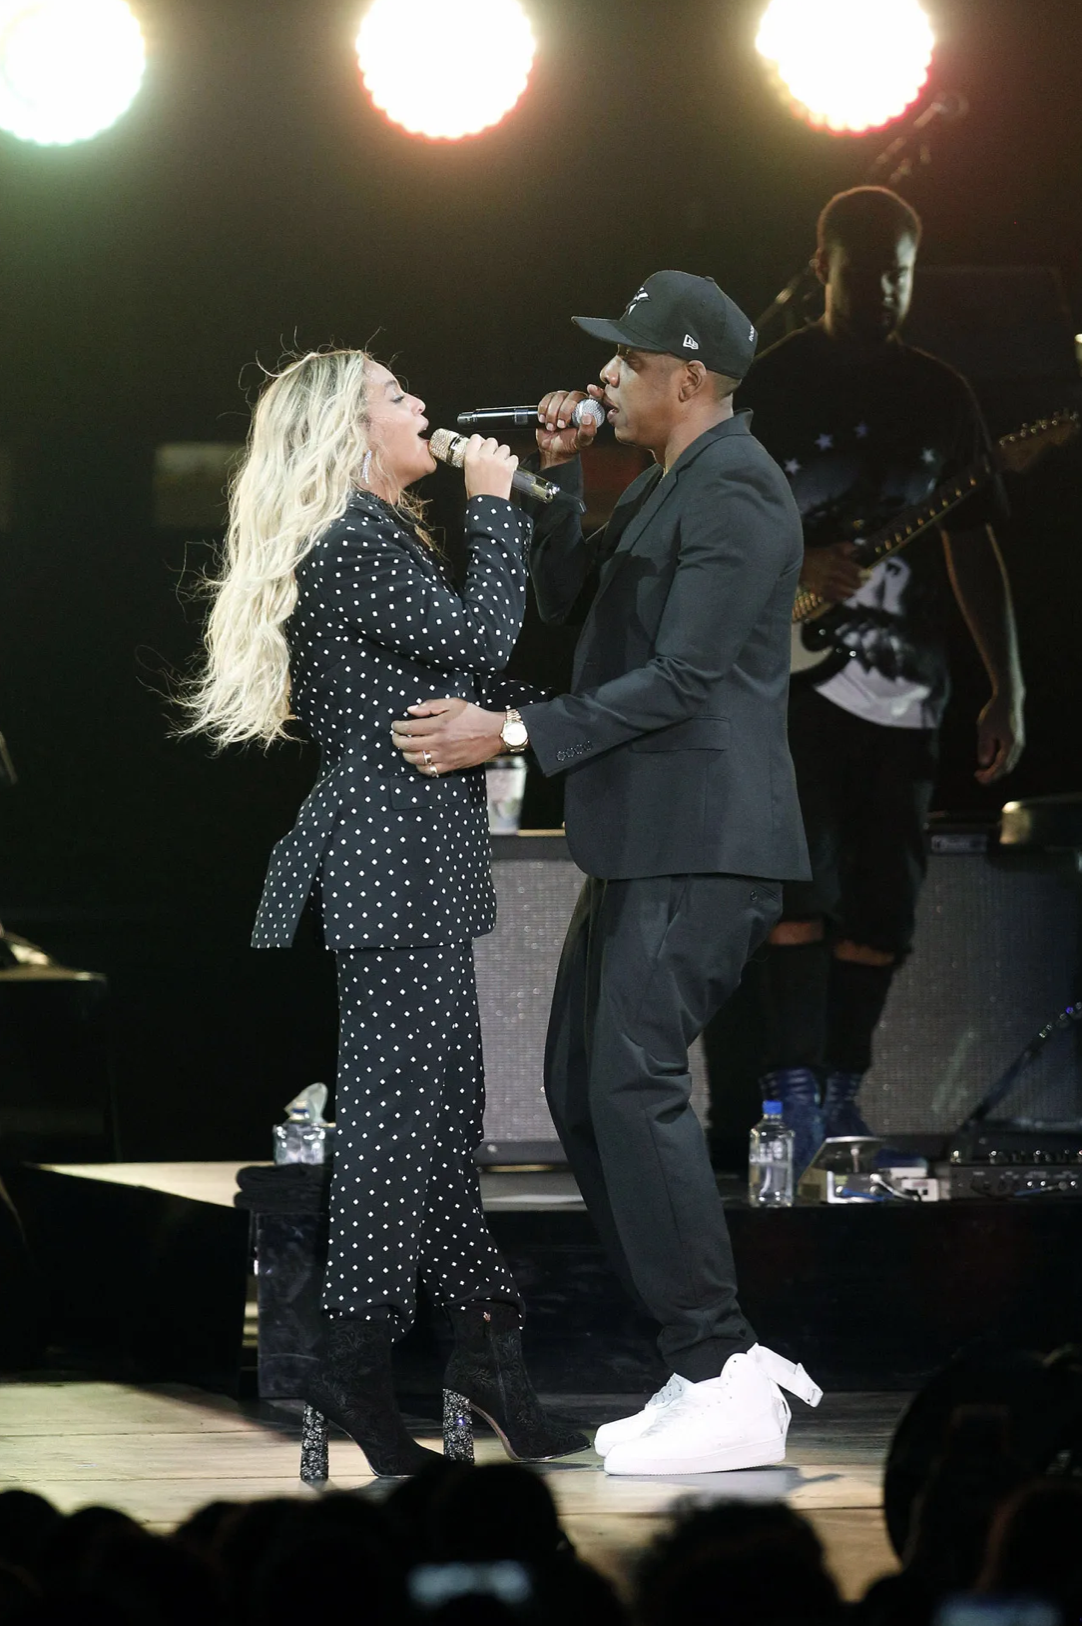 Jay-Z singing on stage with wife, Beyoncé